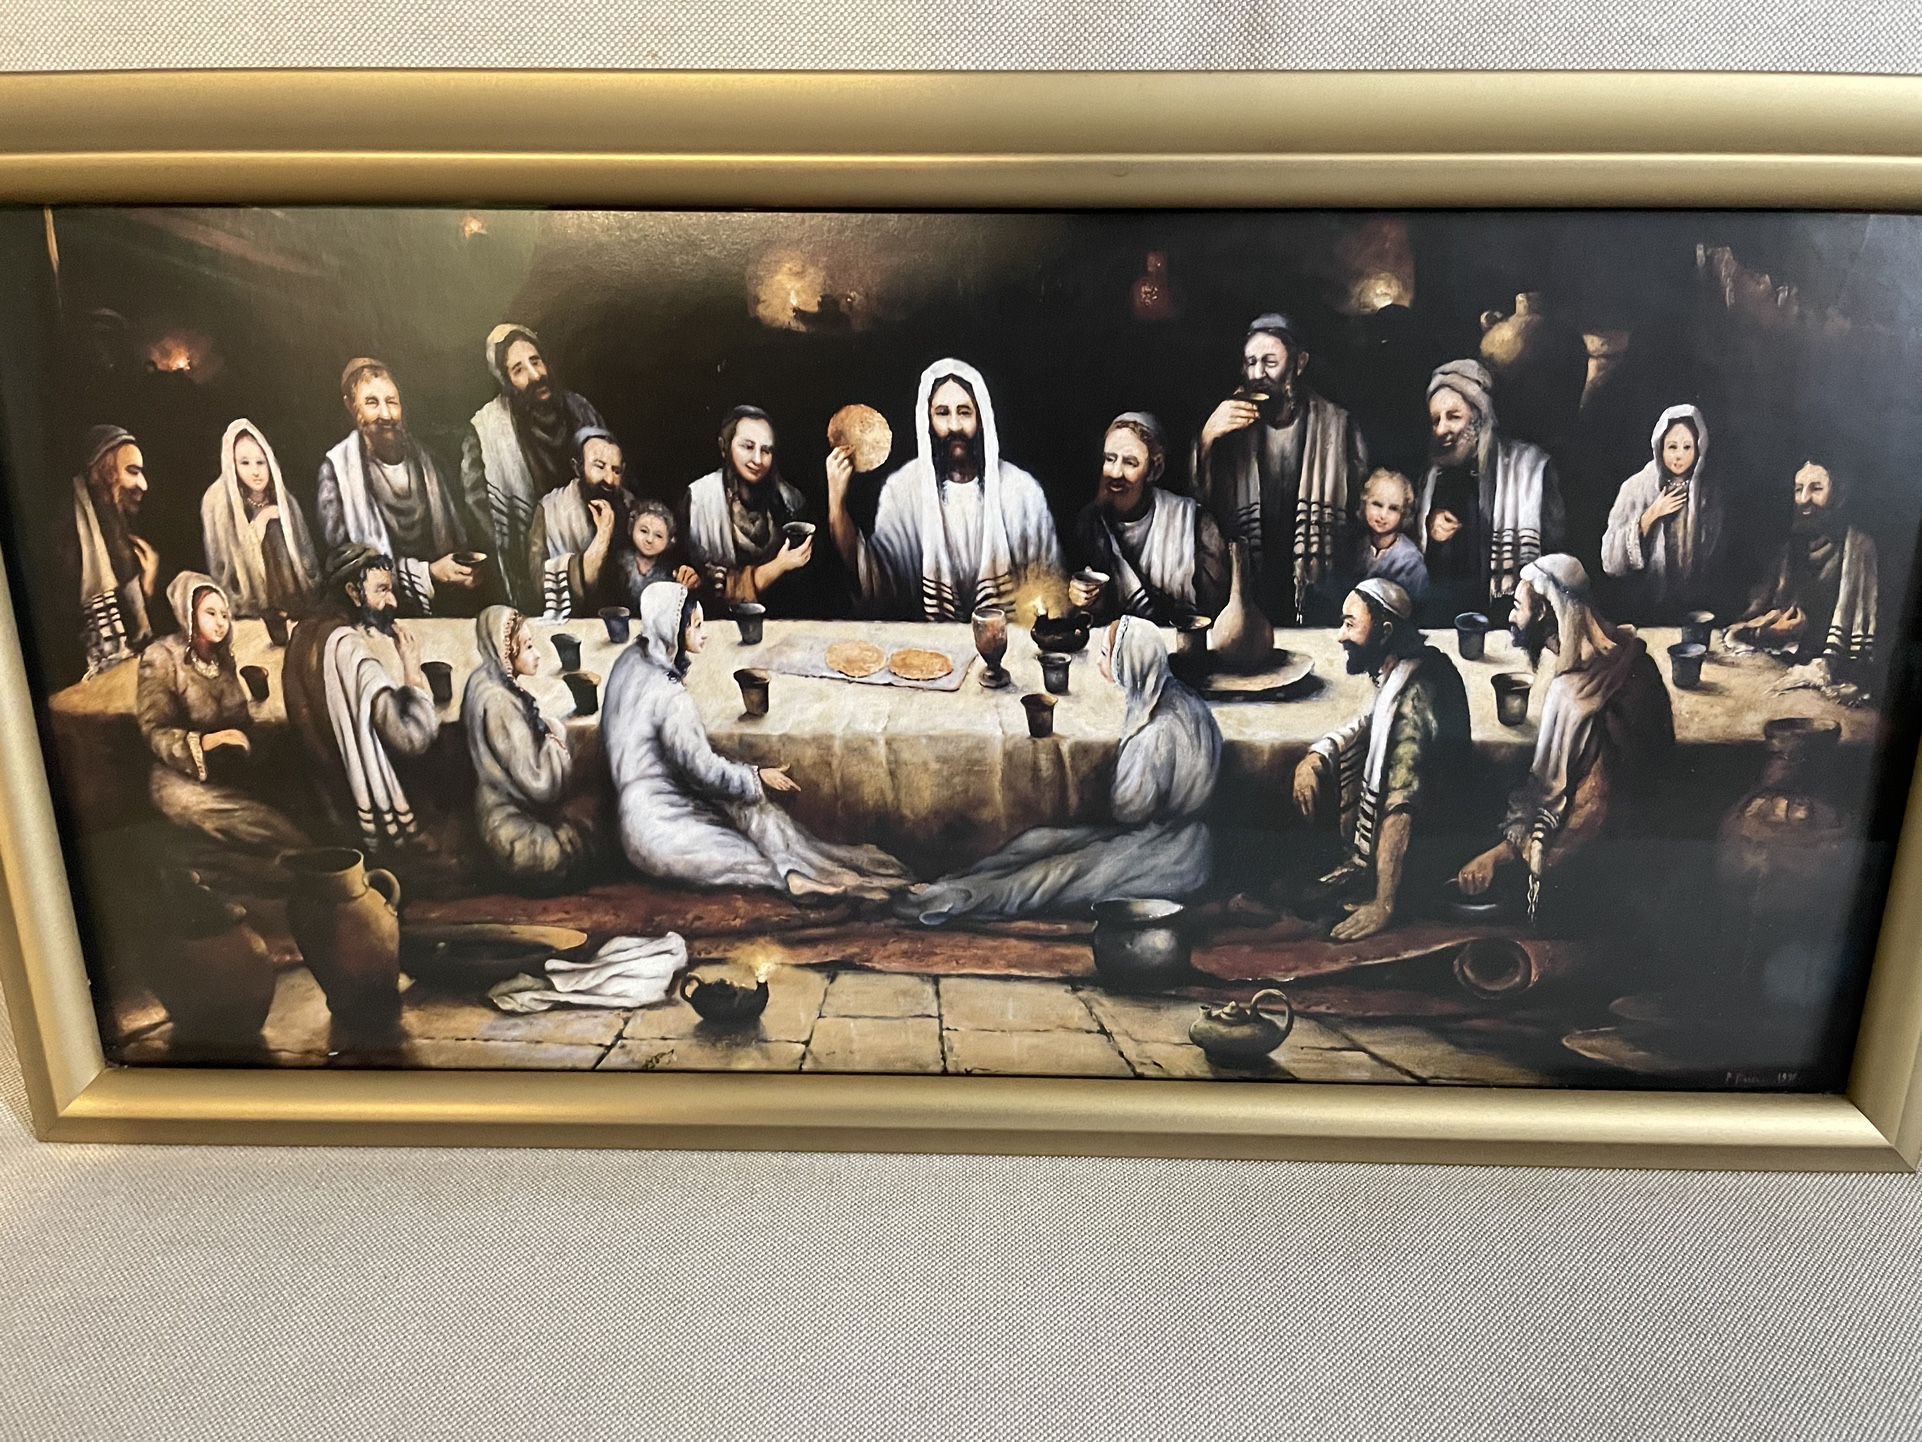 Framed Last Supper Puzzle for Sale in Germantown, MD - OfferUp